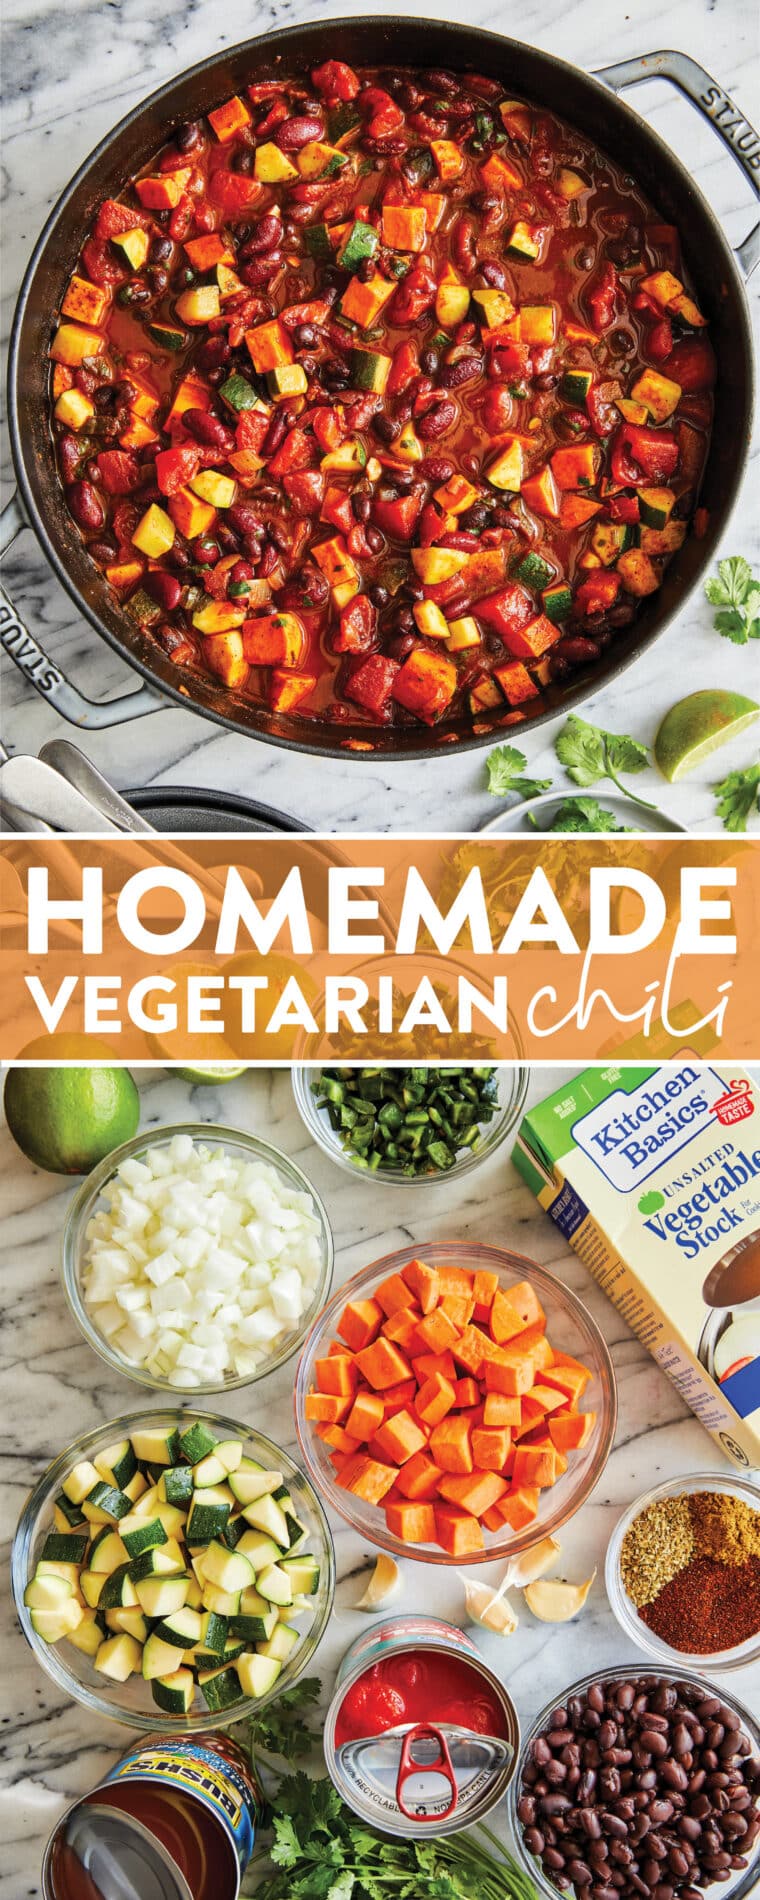 Homemade Vegetarian Chili - Truly the BEST vegetarian chili! Loaded with sweet potato, zucchini, beans + so much flavor! So hearty, so good.